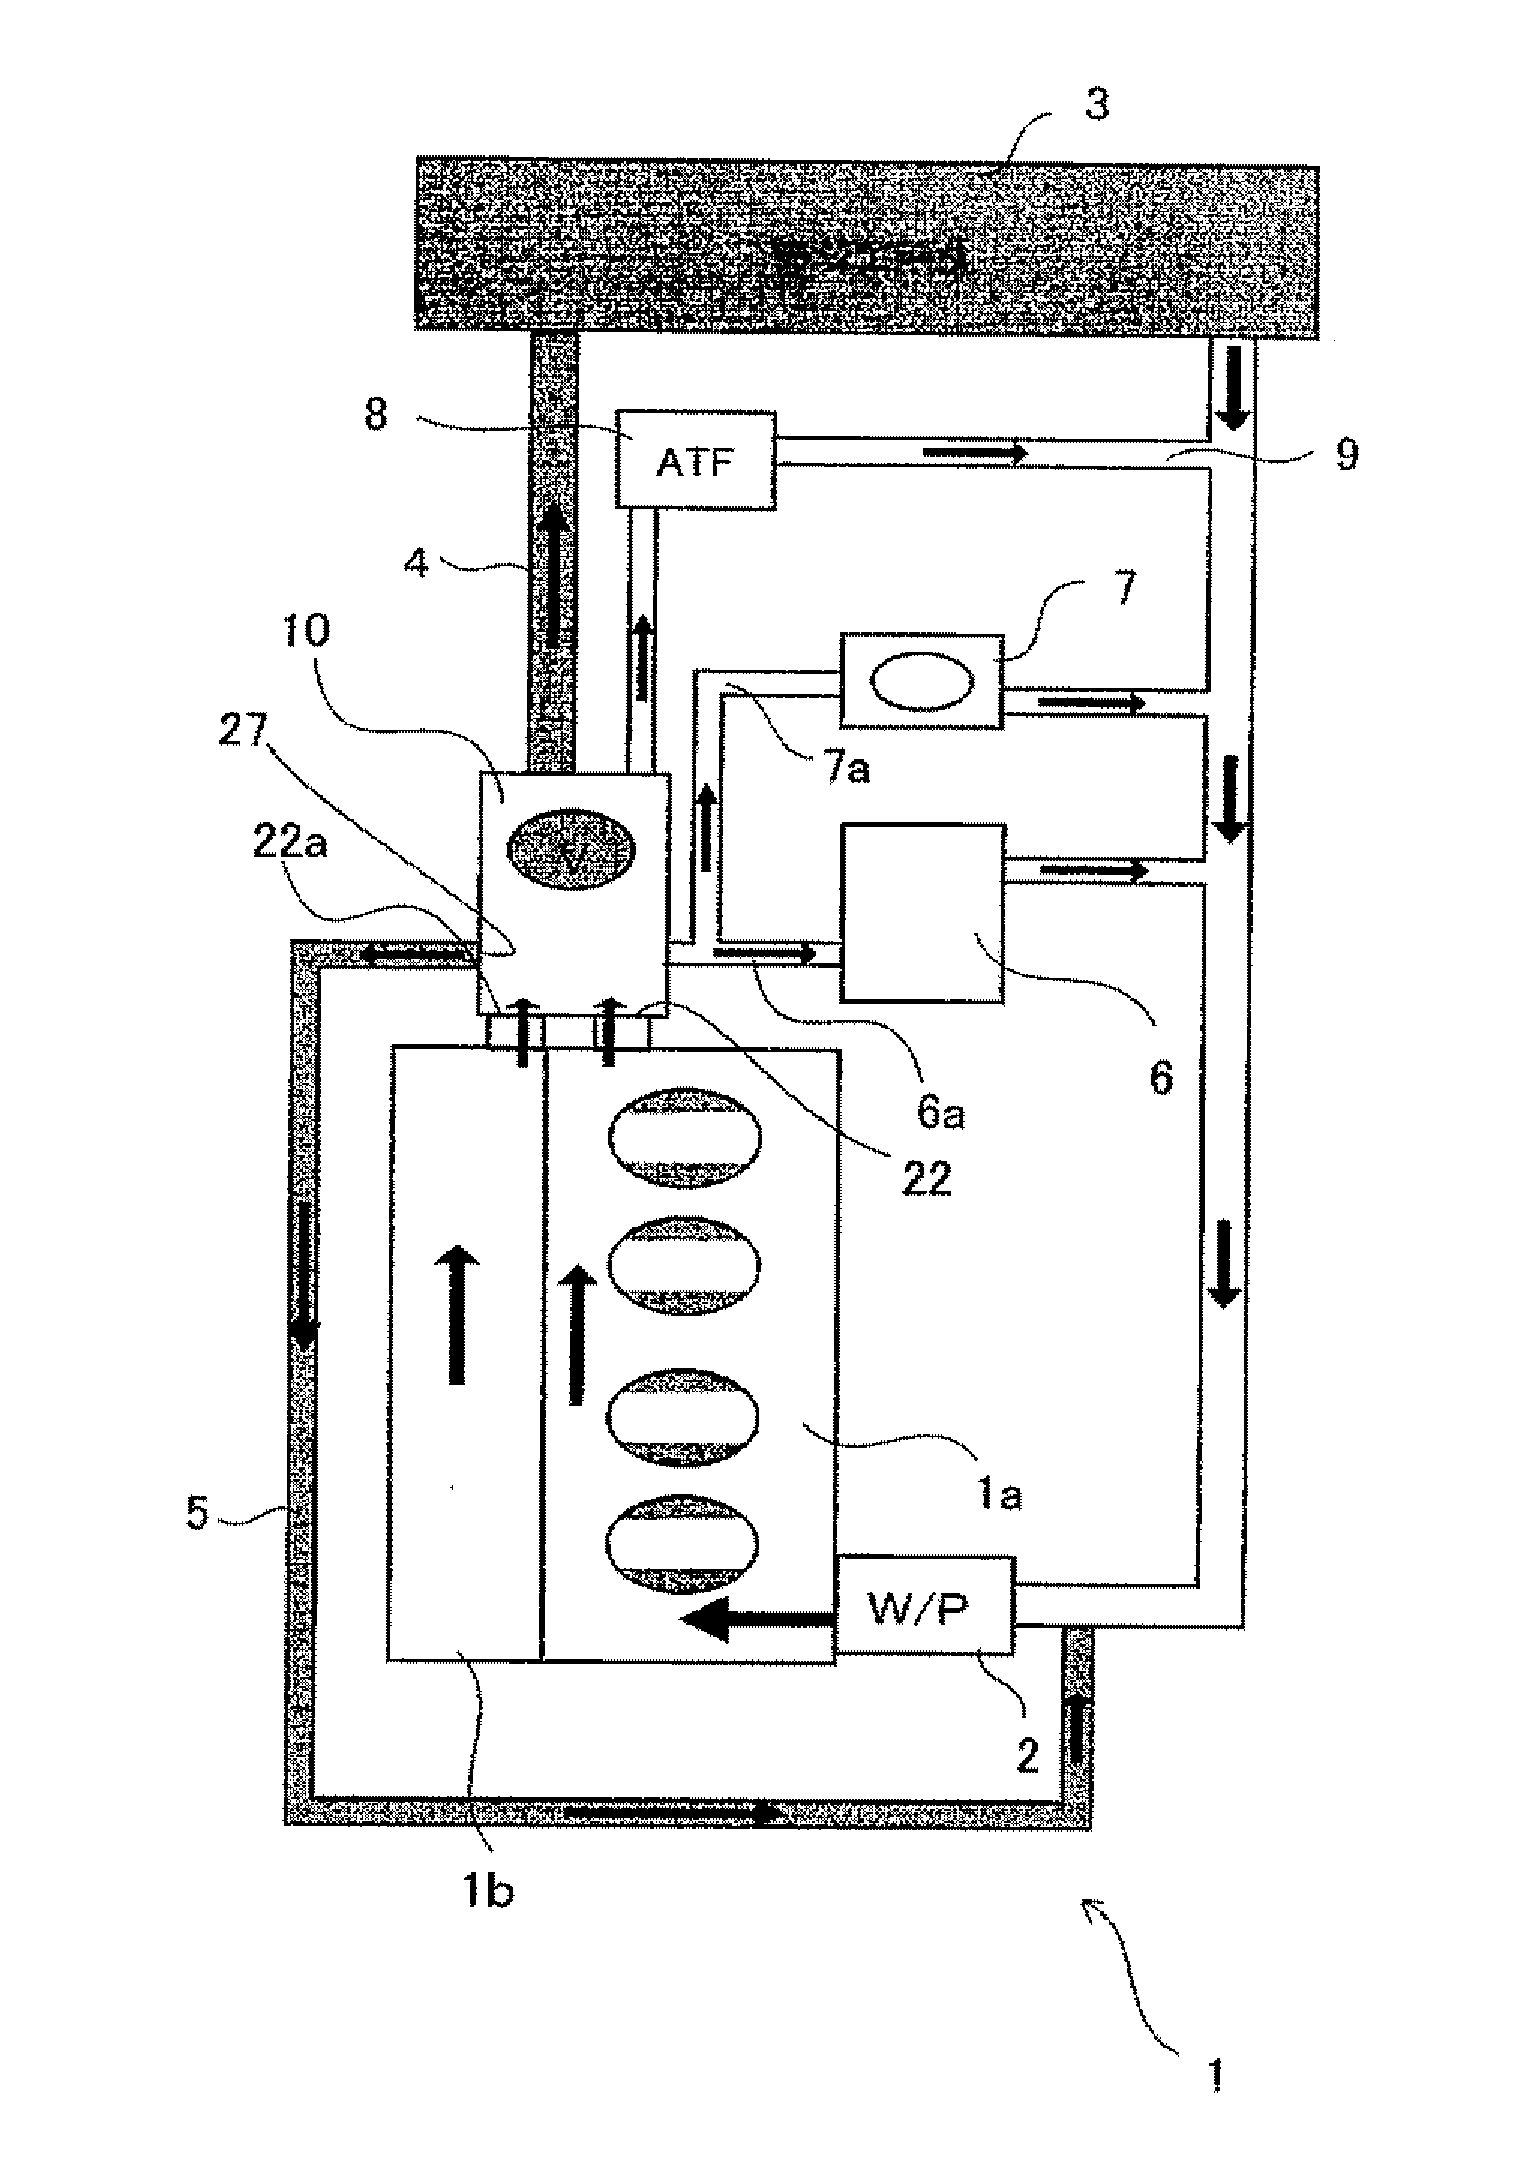 Cooling water control valve apparatus